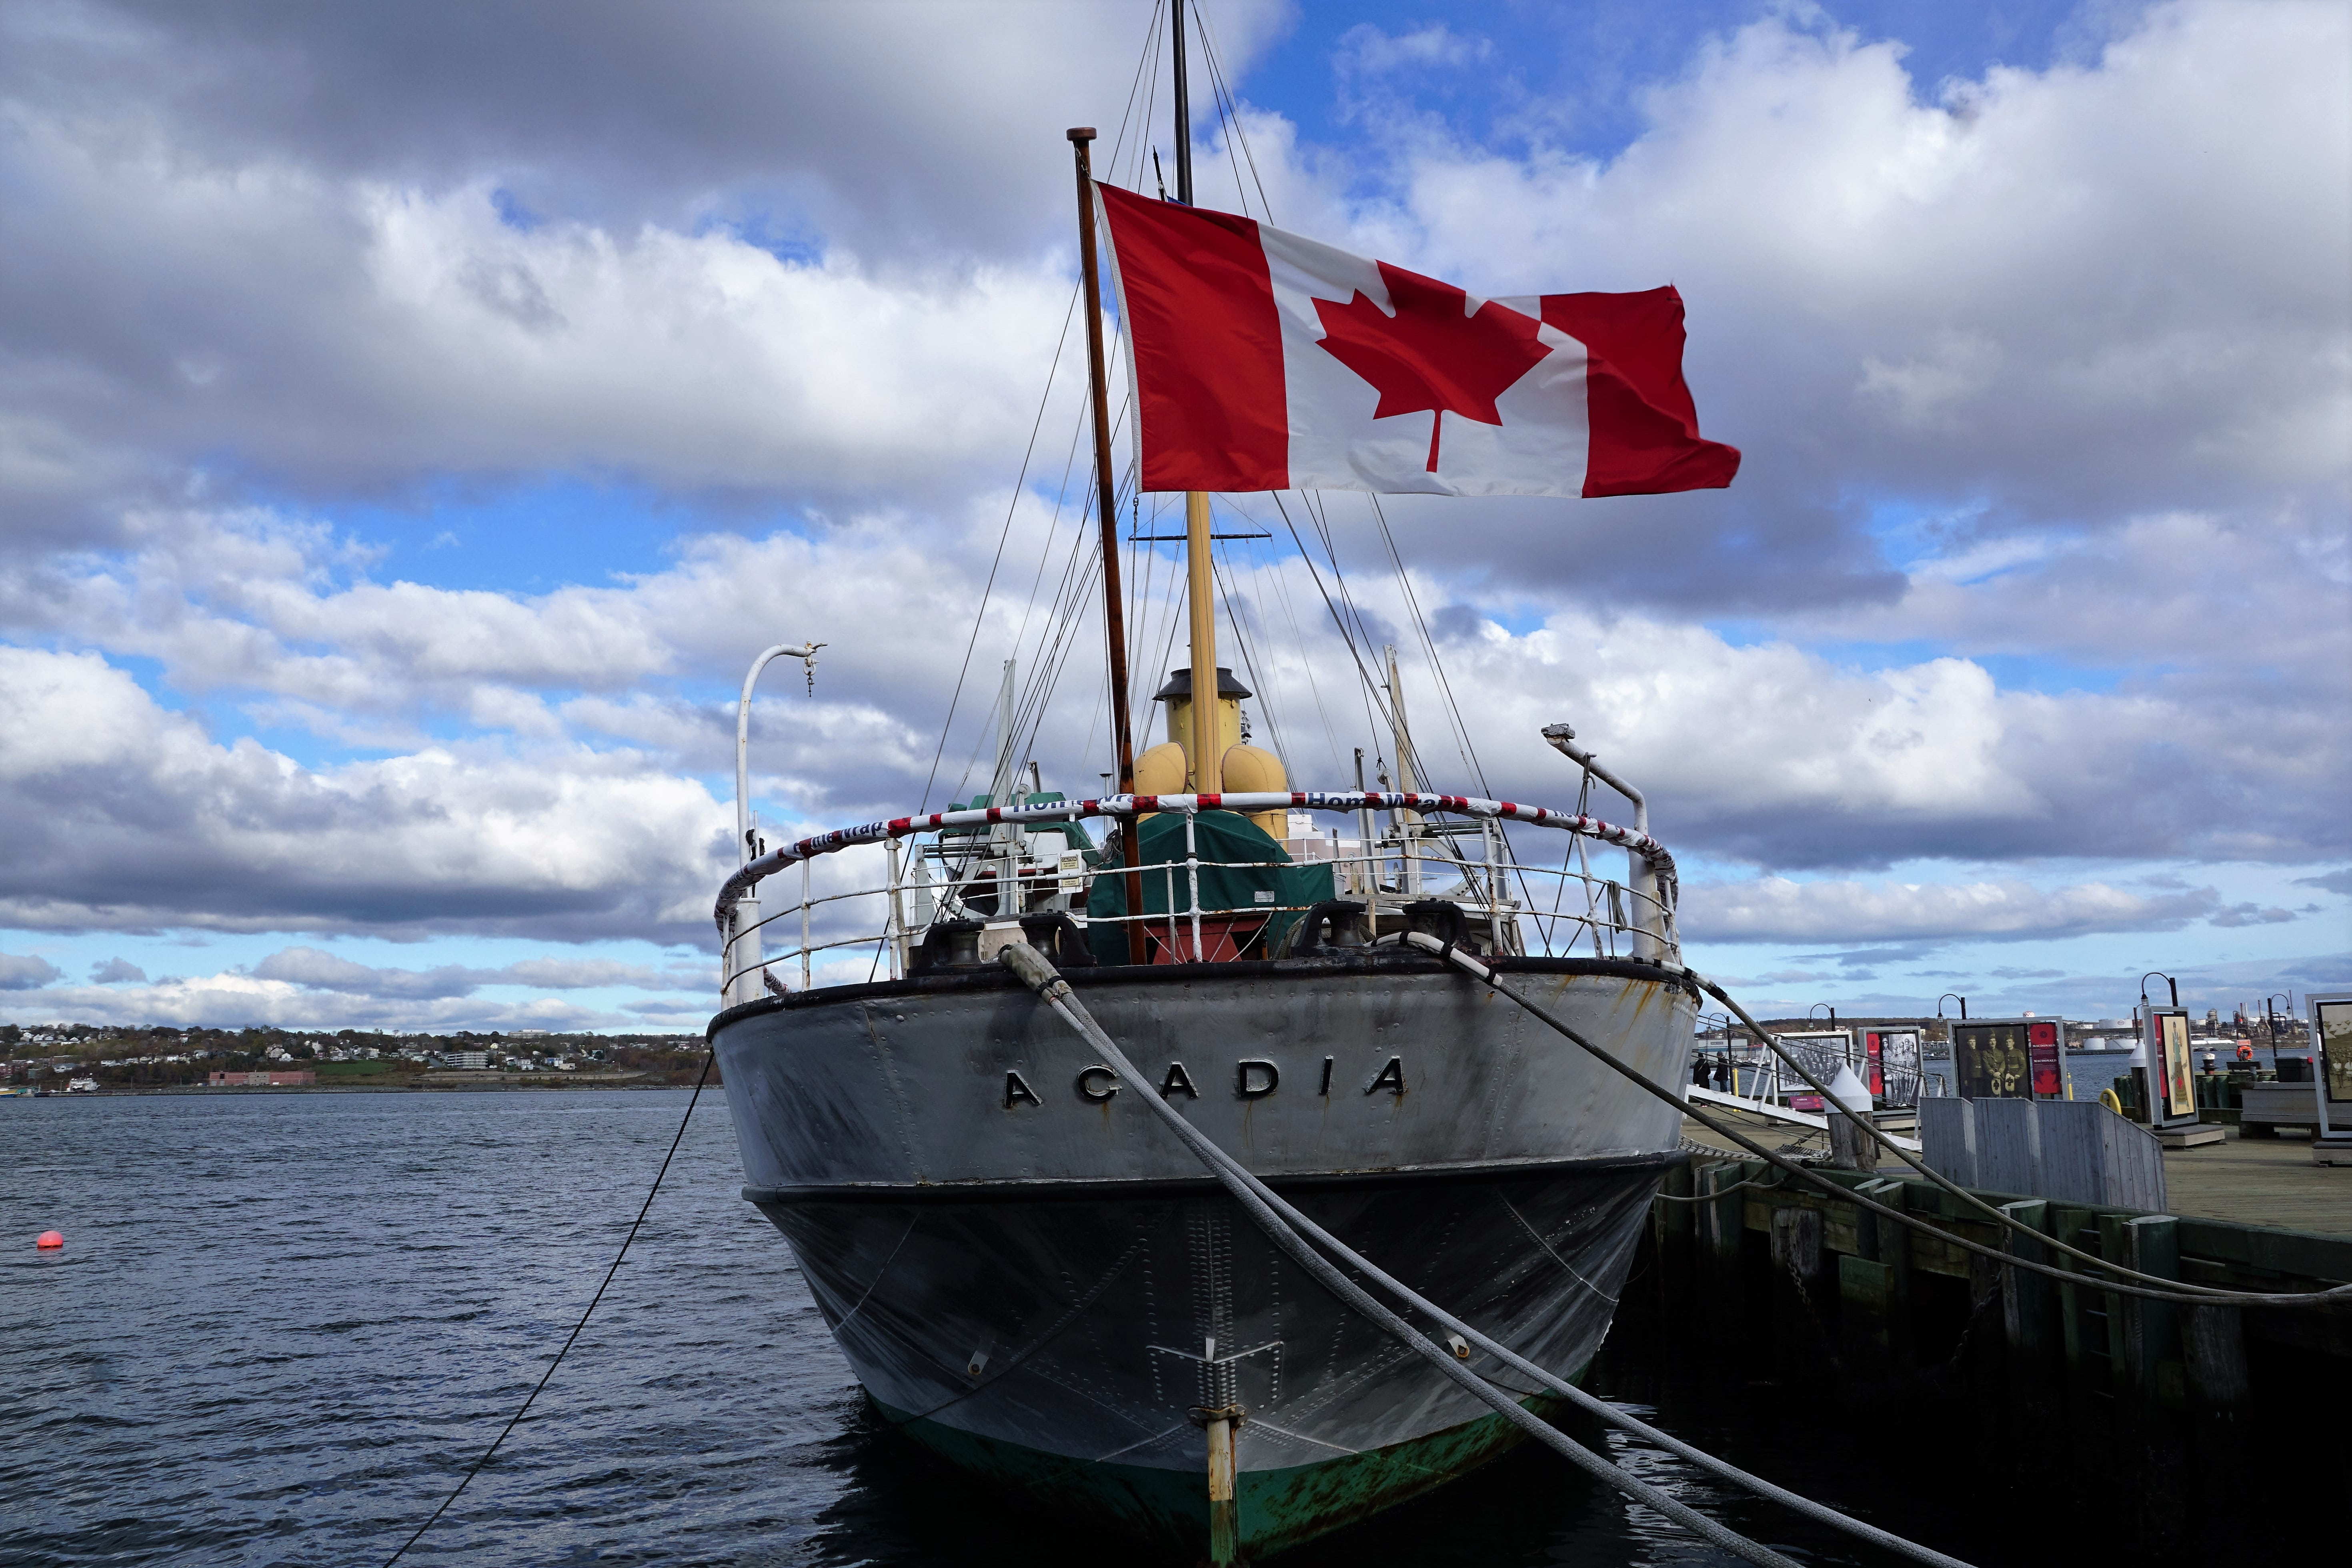 gray Acadia boat on sea with Canada flag during daytime, boot